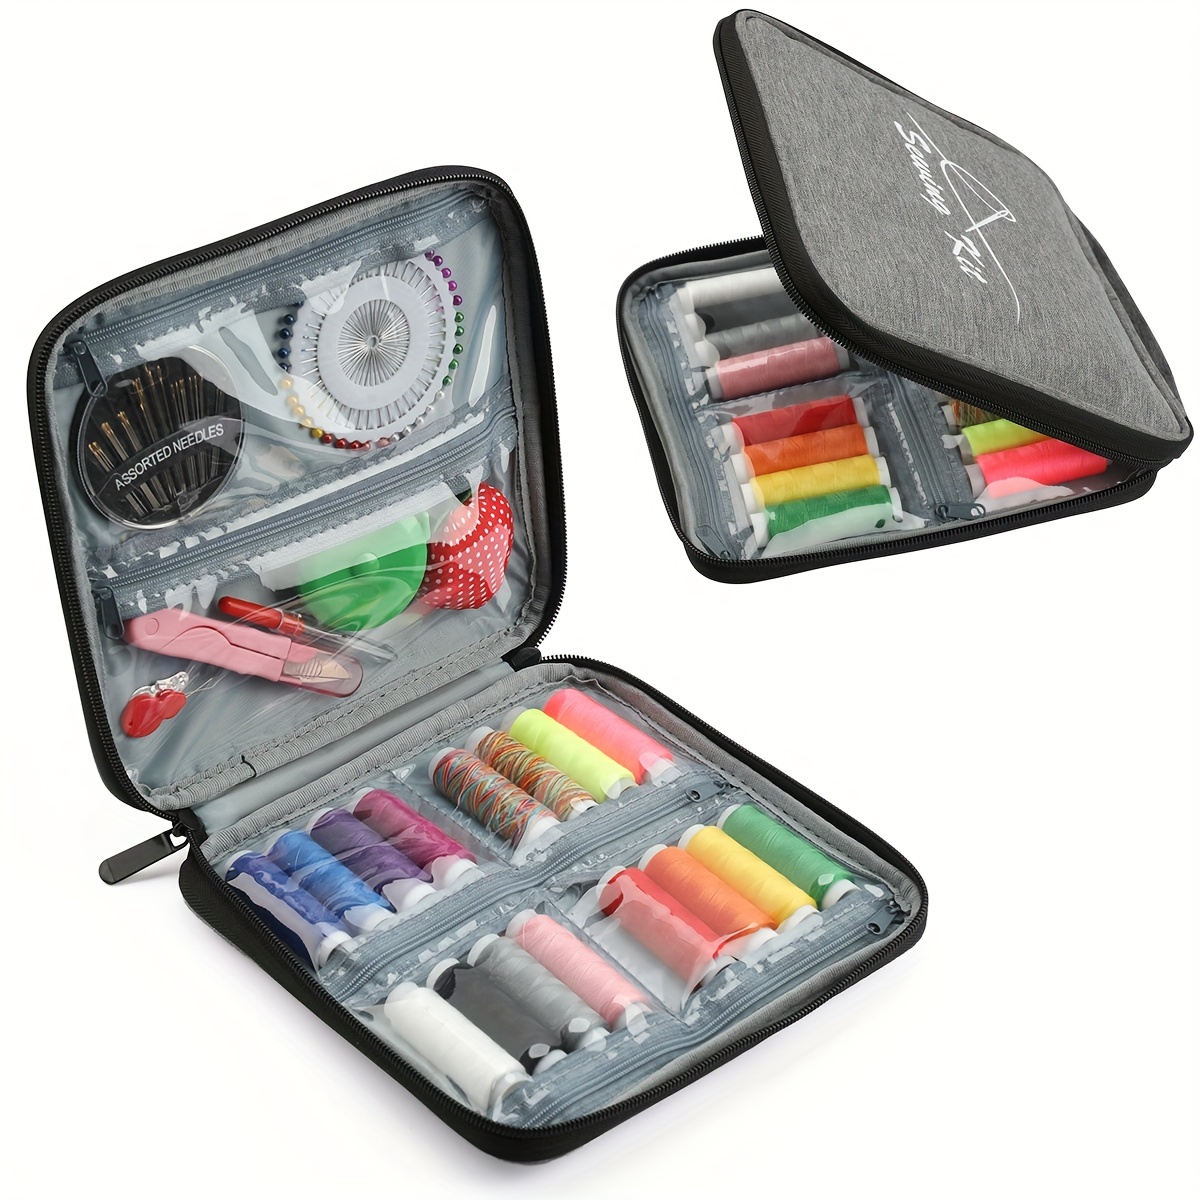 Sewing Kit for Adults - over 100 Sewing Supplies and Accessories - Needle  and Thread Kit for Sewing - Hand Sewing Kit Basic for Small Fixes - Sewing